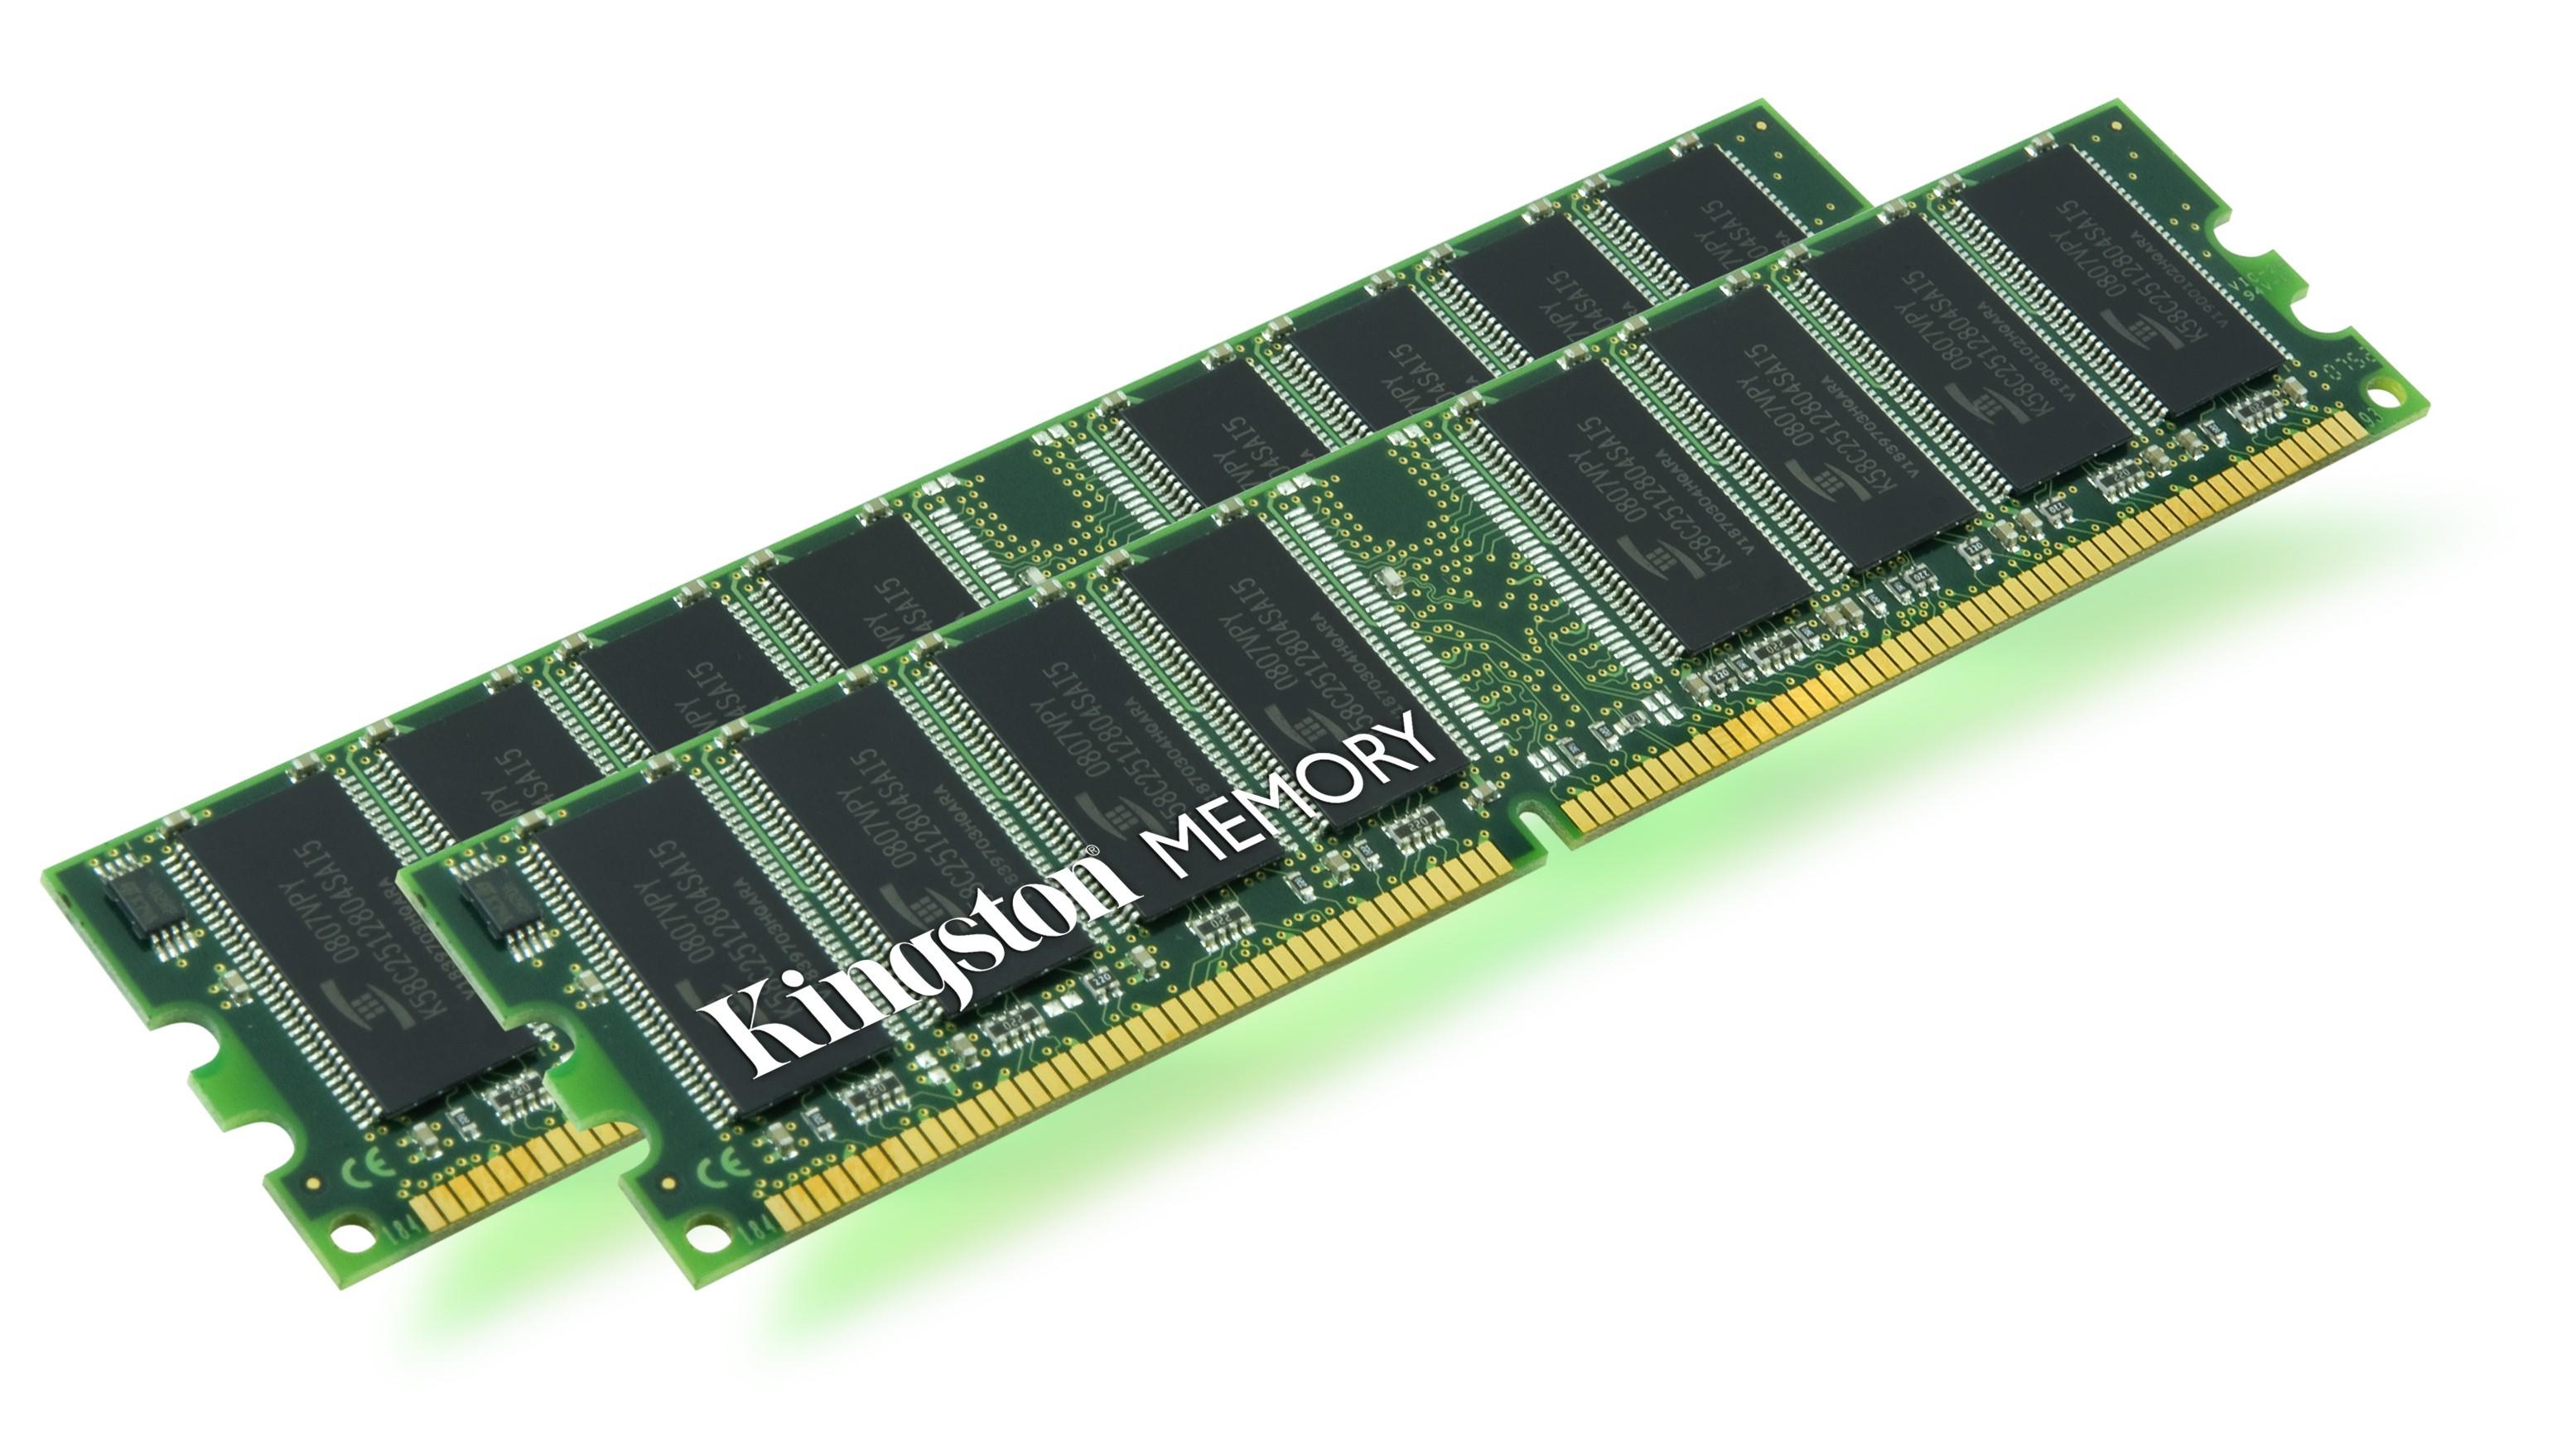 Foto Kingston technology system specific memory 1gb ddr2-667